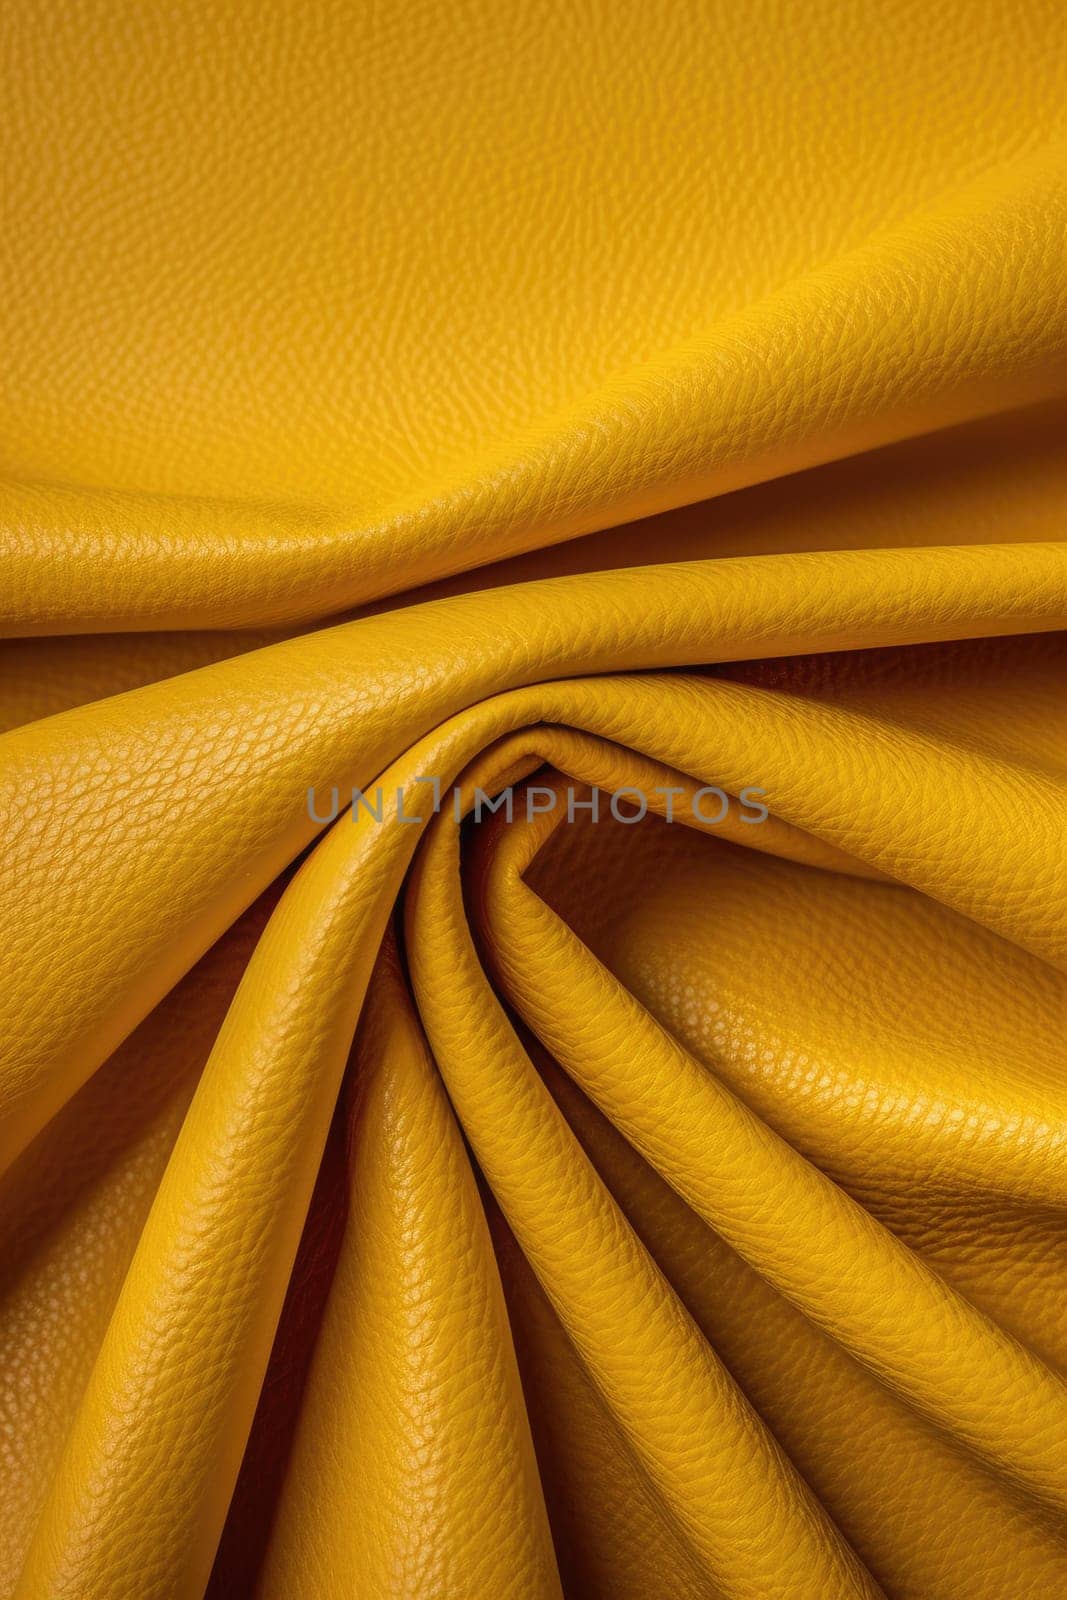 Artificial leather texture with waves and bends, AI Generated by Desperada